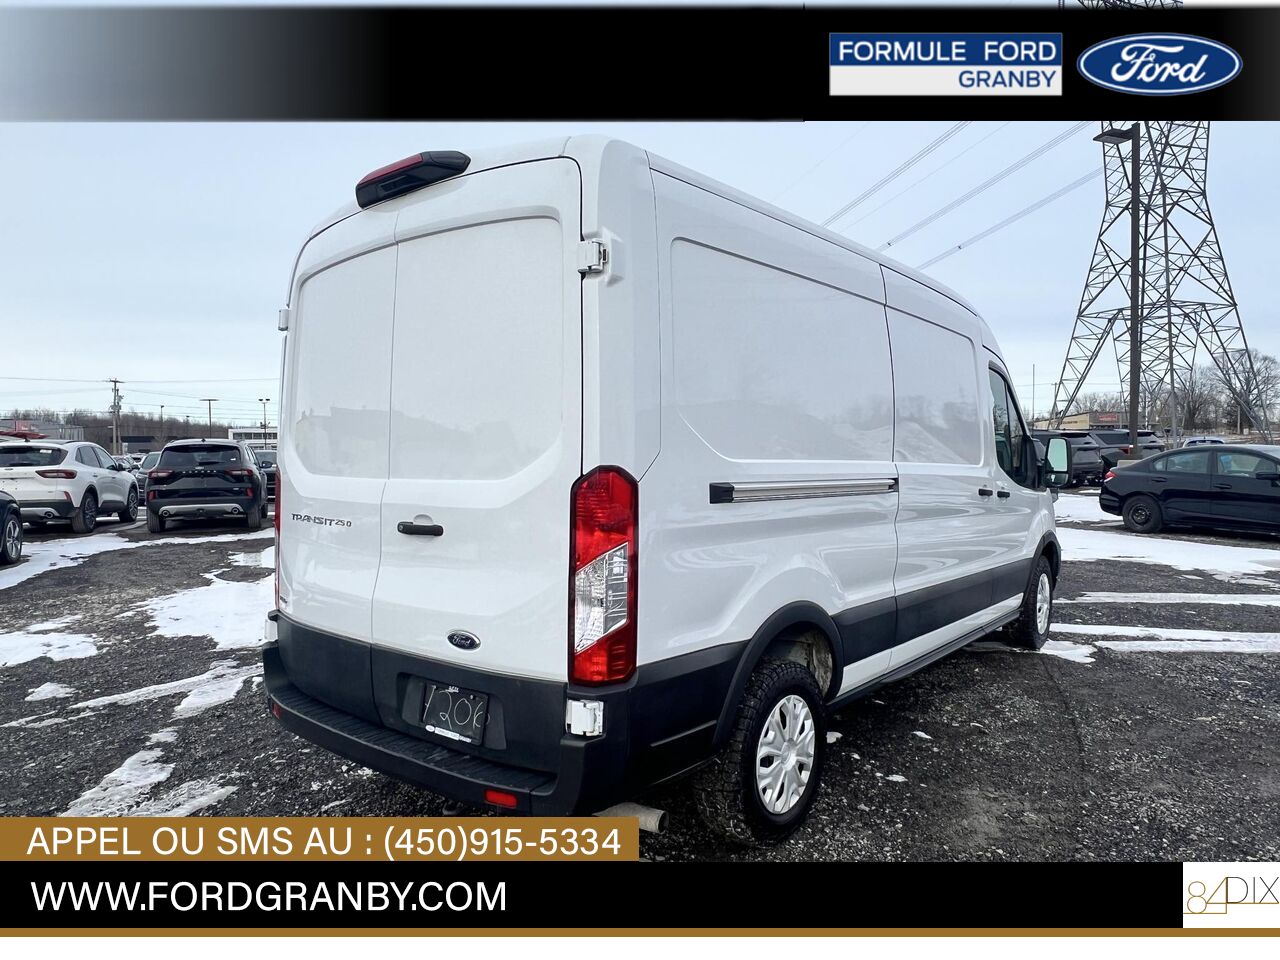 Ford Transit fourgon utilitaire 2021 Granby - photo #3